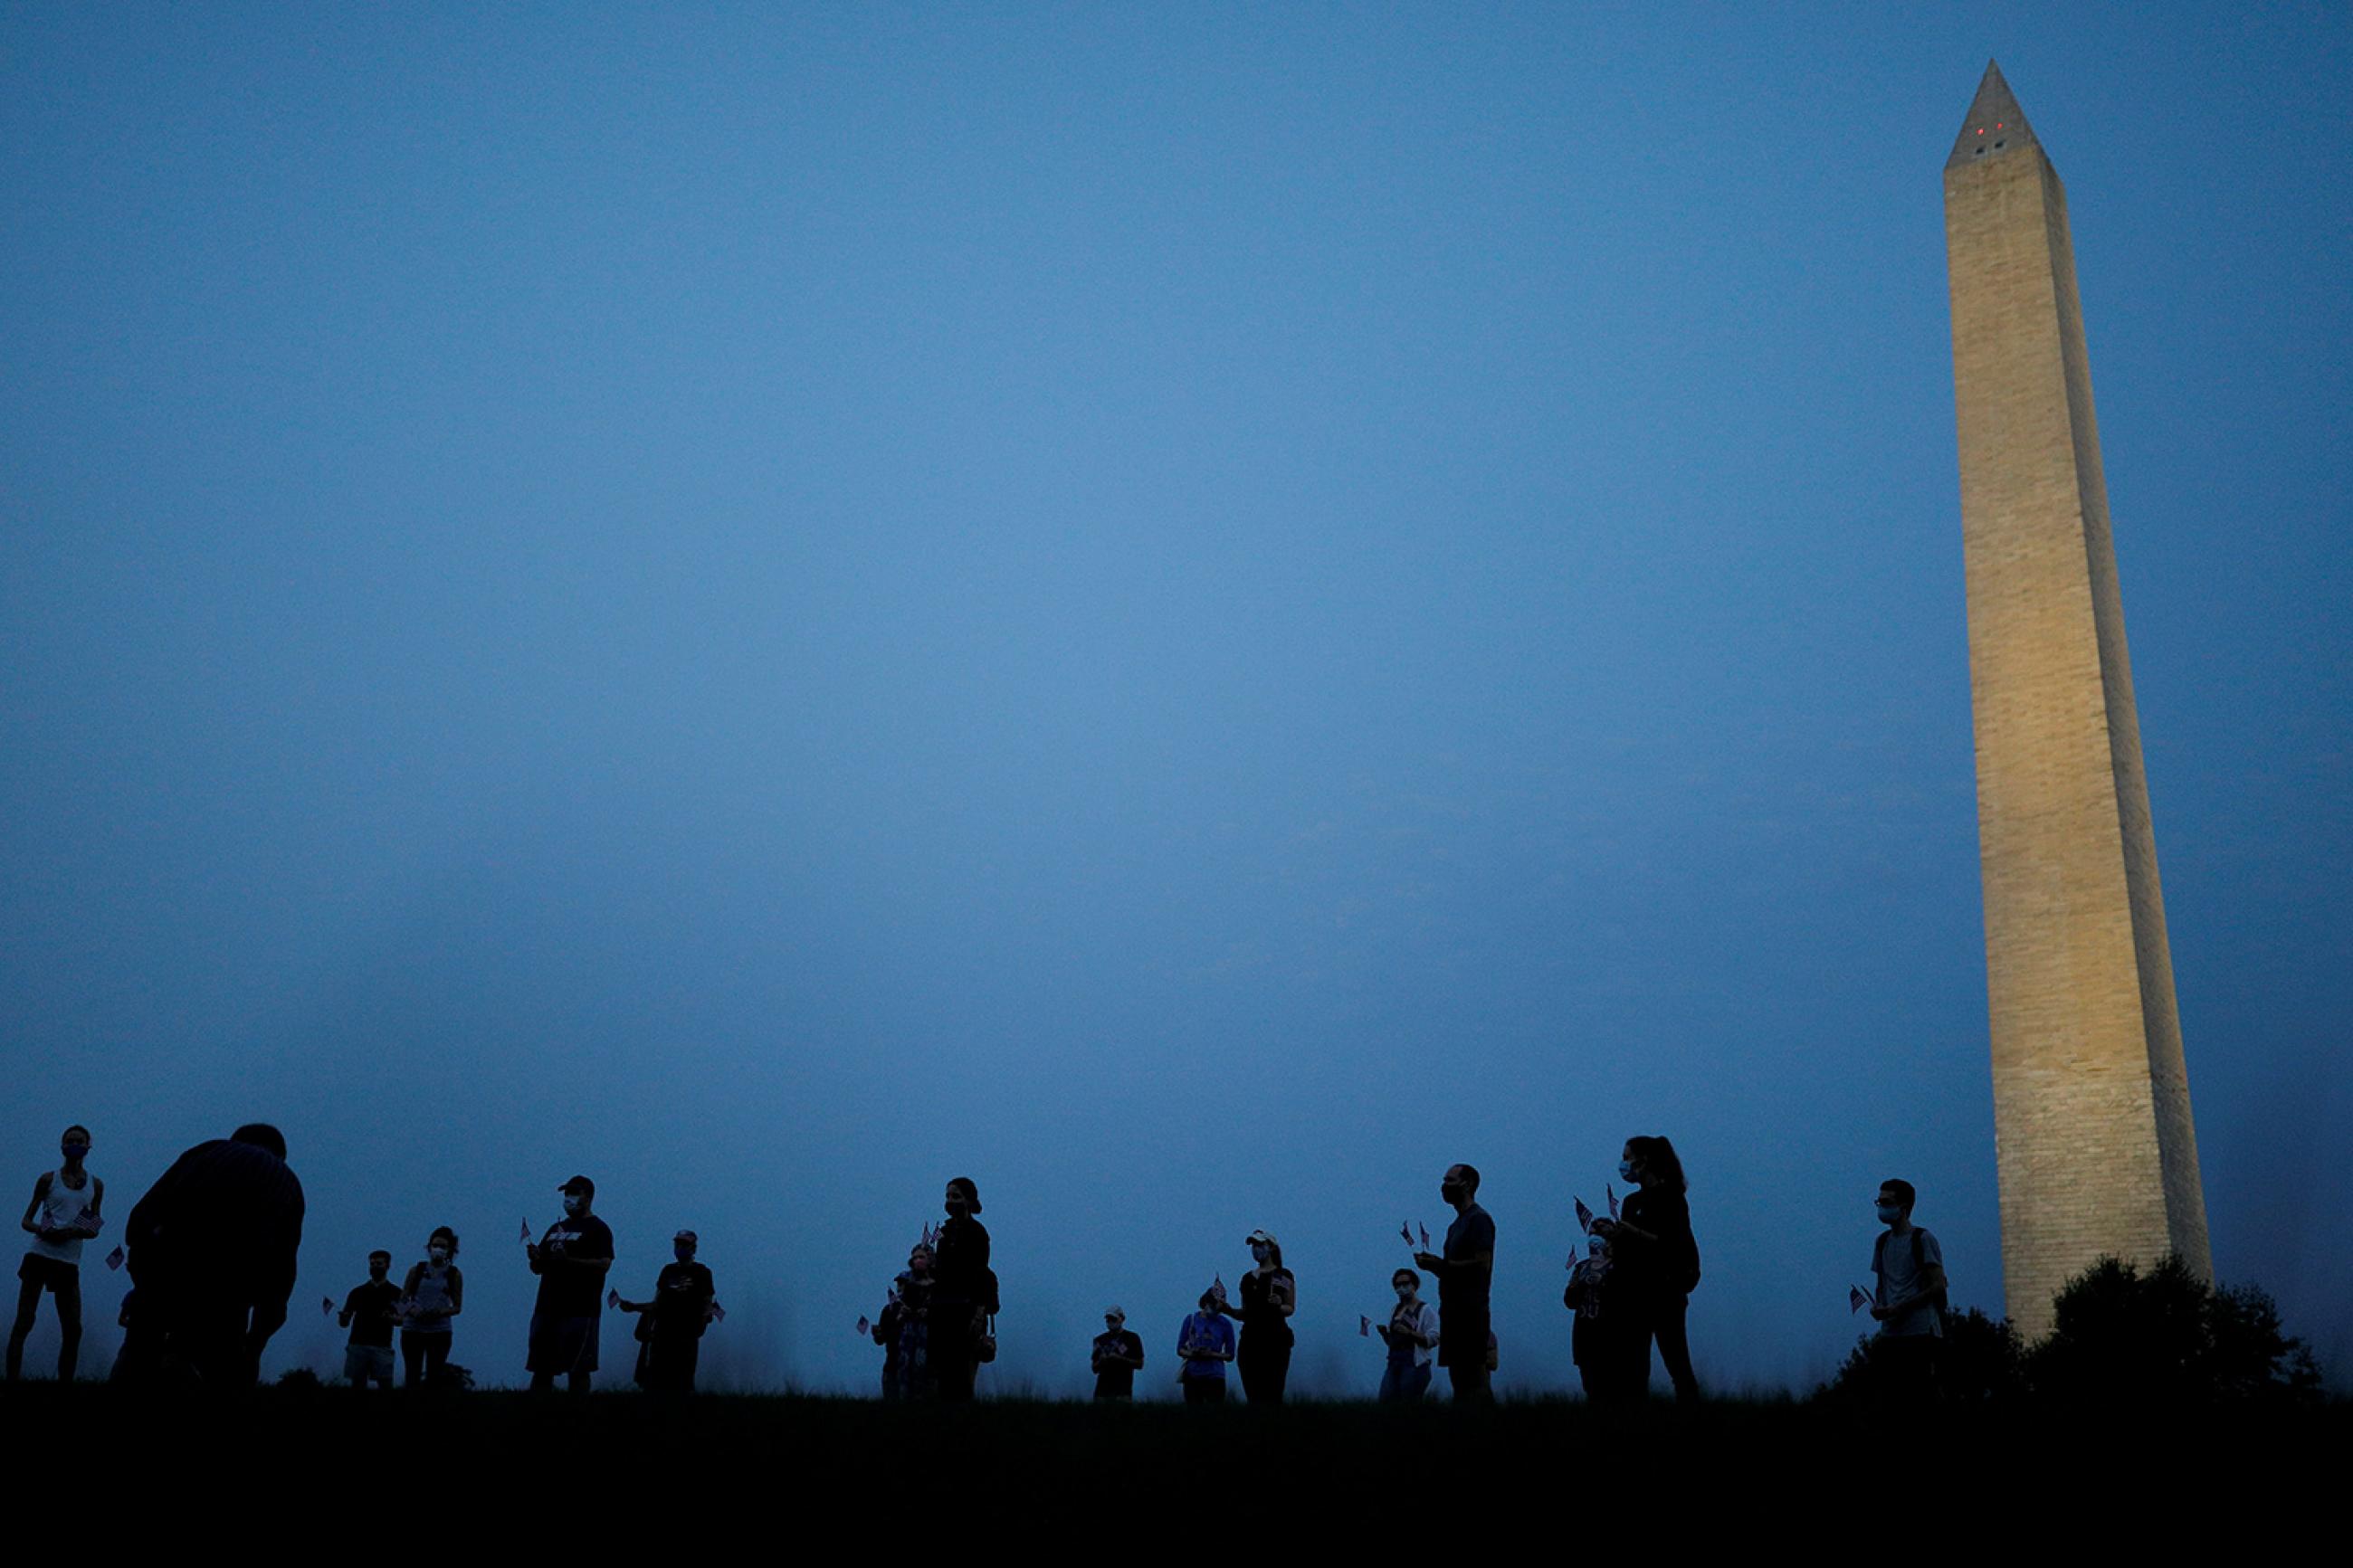 They are informally honored—but are they officially counted? Activists stand at sunrise to memorialize victims of the coronavirus, near the Washington Monument in Washington, DC on August 27, 2020. The photo shows the monument in the thin morning lite with a silhouette line of people standing in the foreground. REUTERS/Tom Brenner